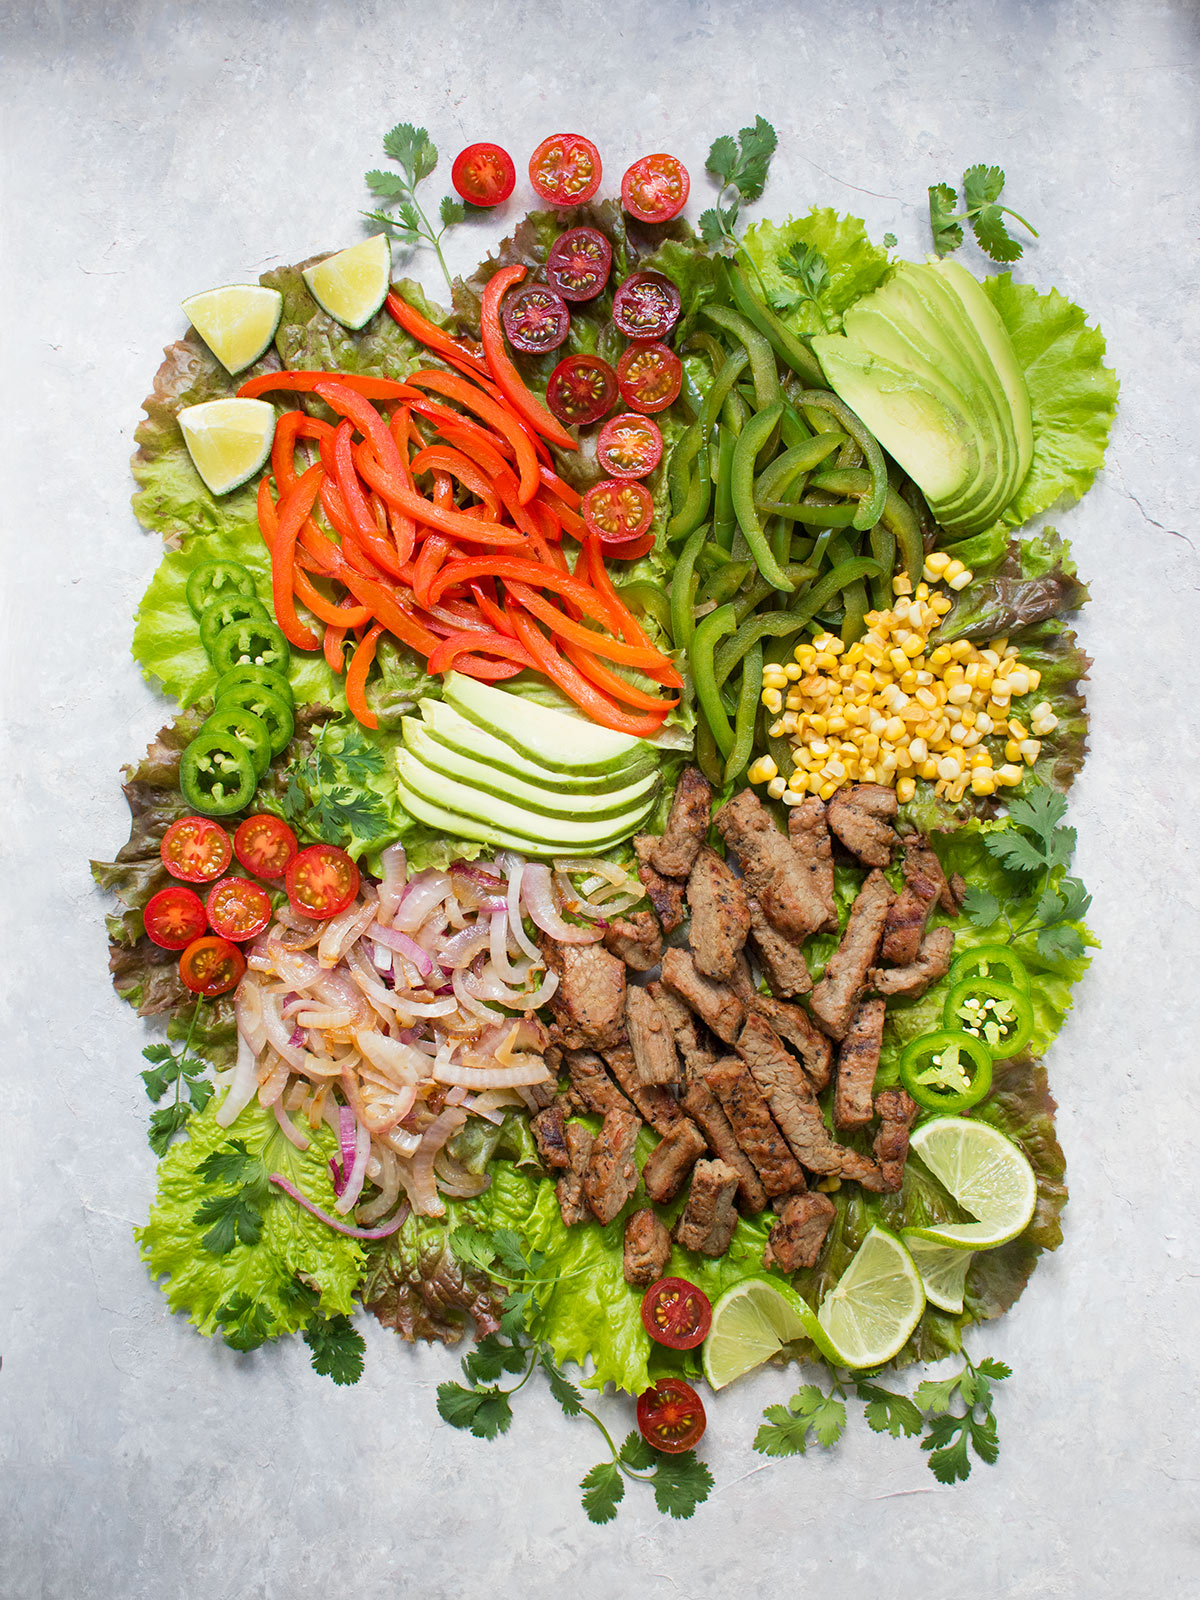 Ingredients for the Beef Fajita Salad spread out on a board.